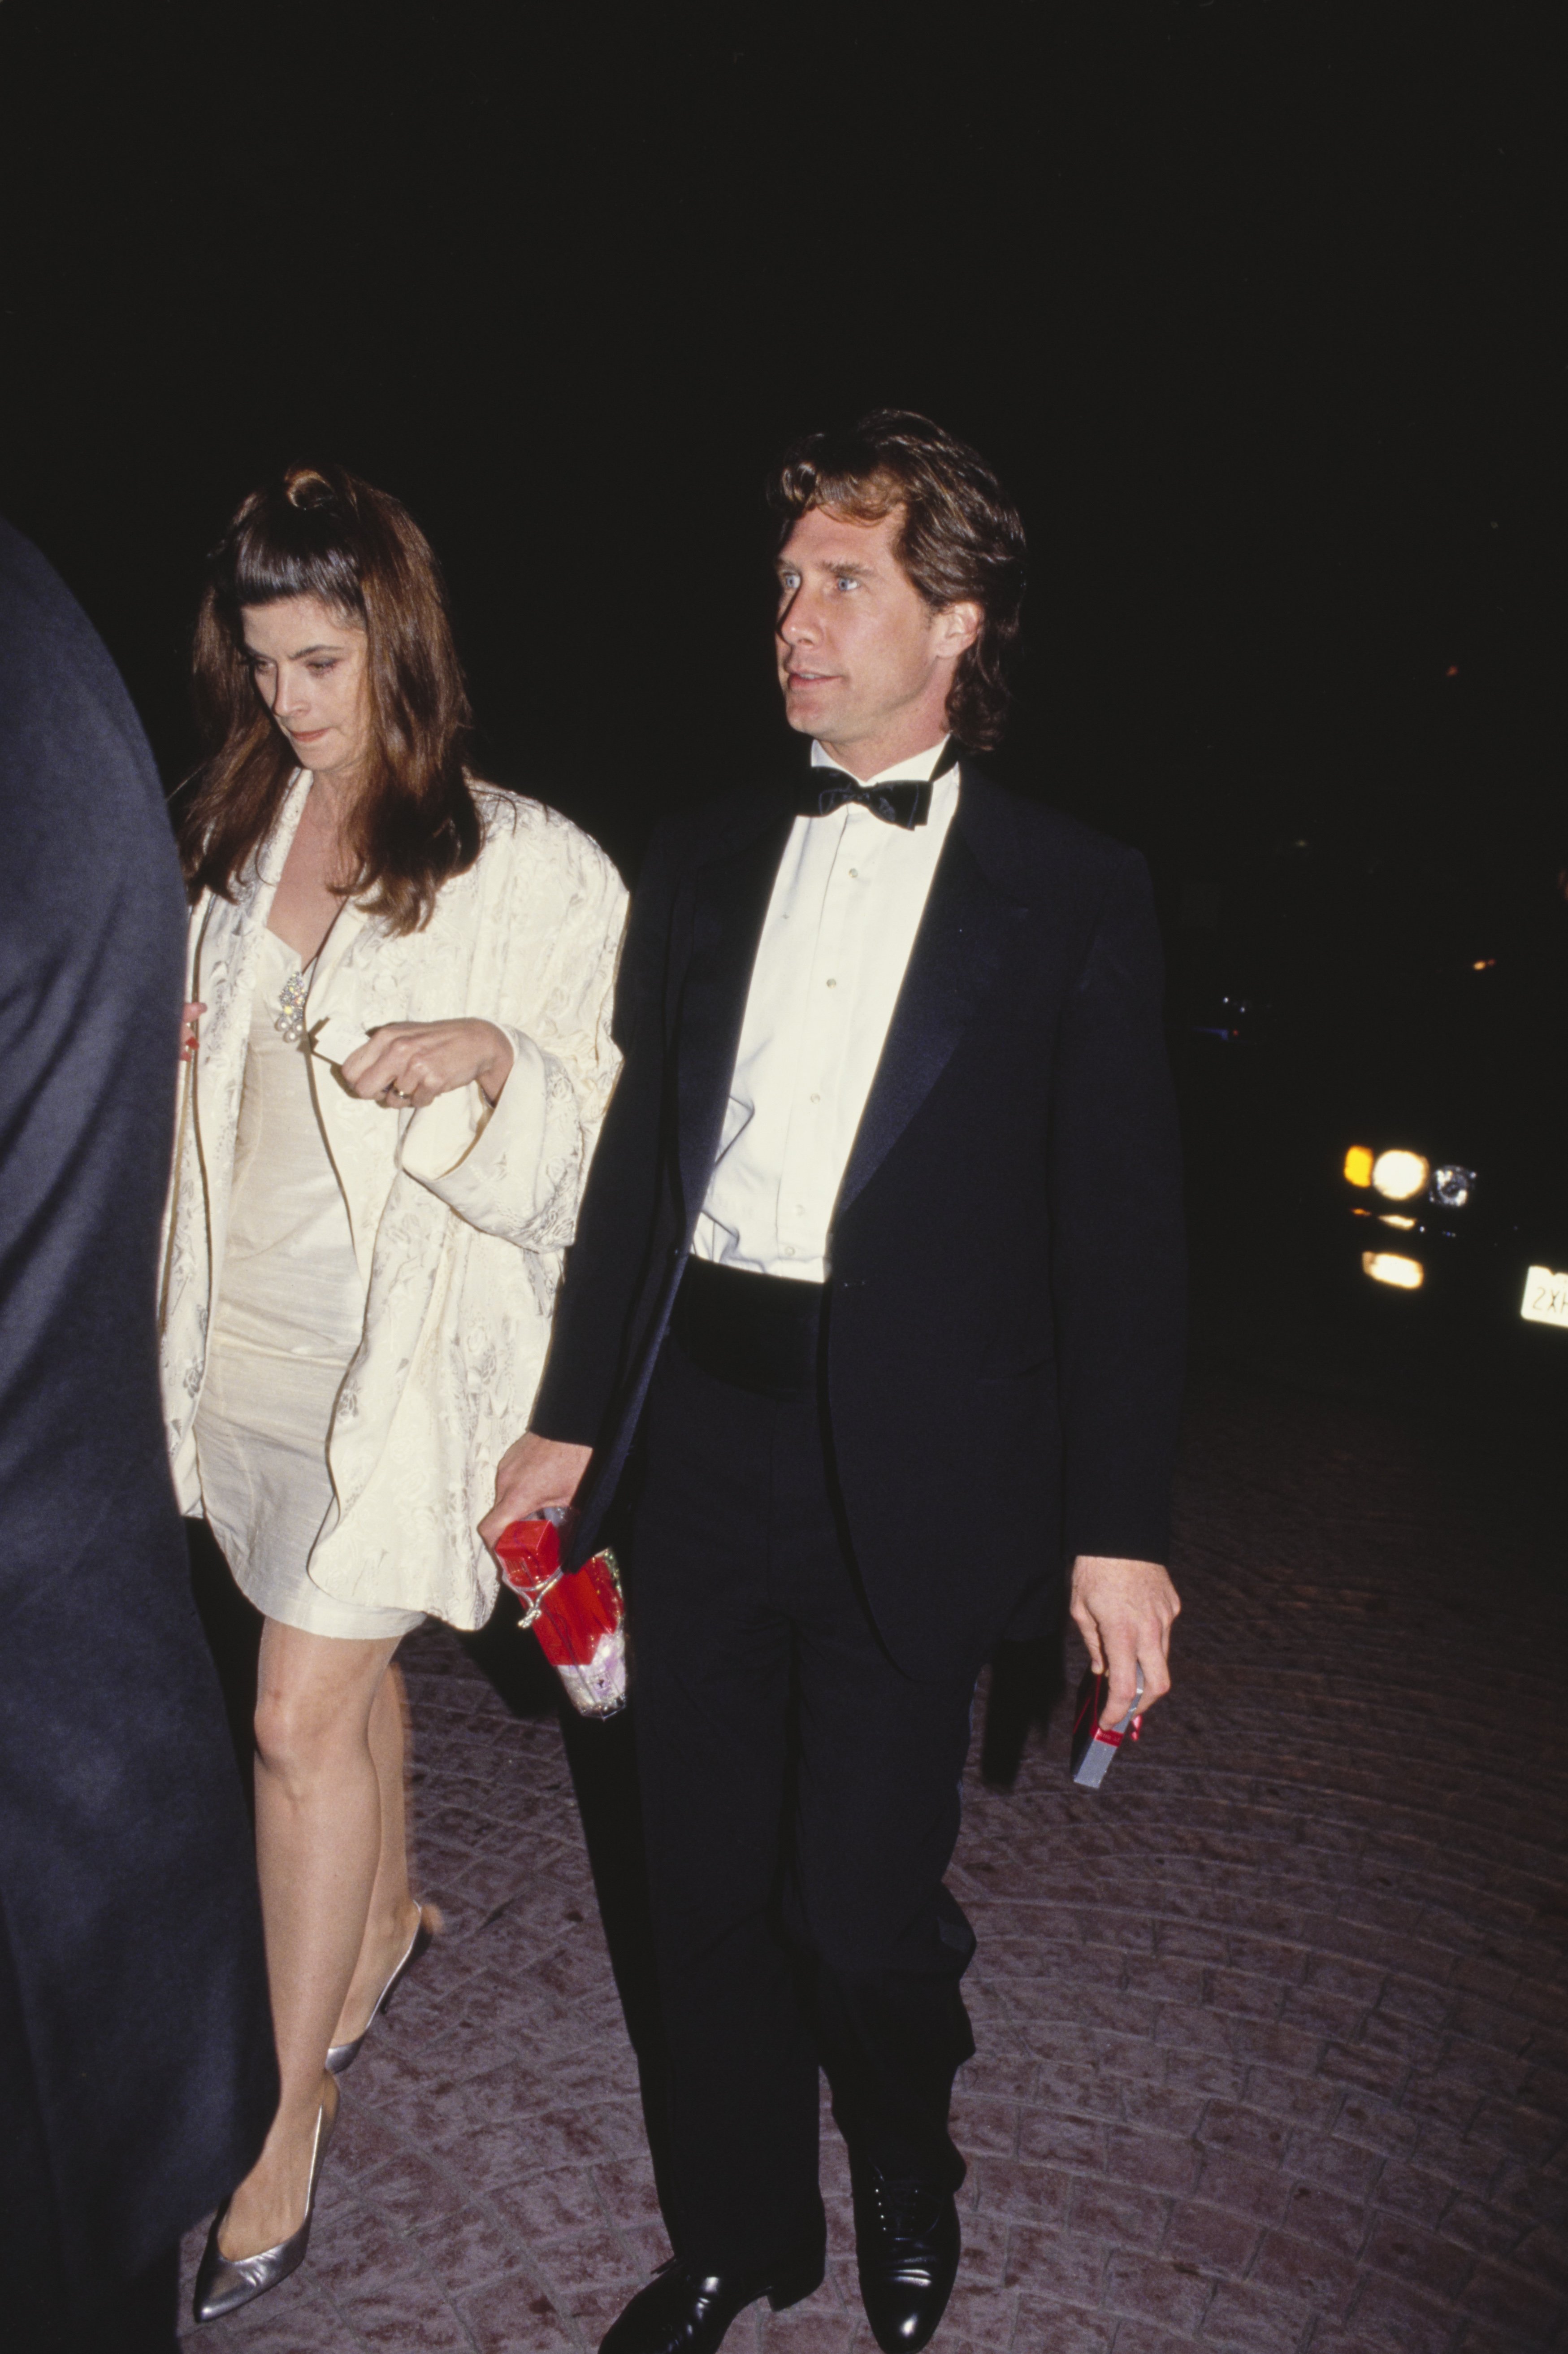 Parker Stevenson and Kirstie Alley attend the 49th Annual Golden Globe Awards at the Beverly Hilton Hotel in Beverly Hills, California, 18th January 1992. | Source: Getty Images 